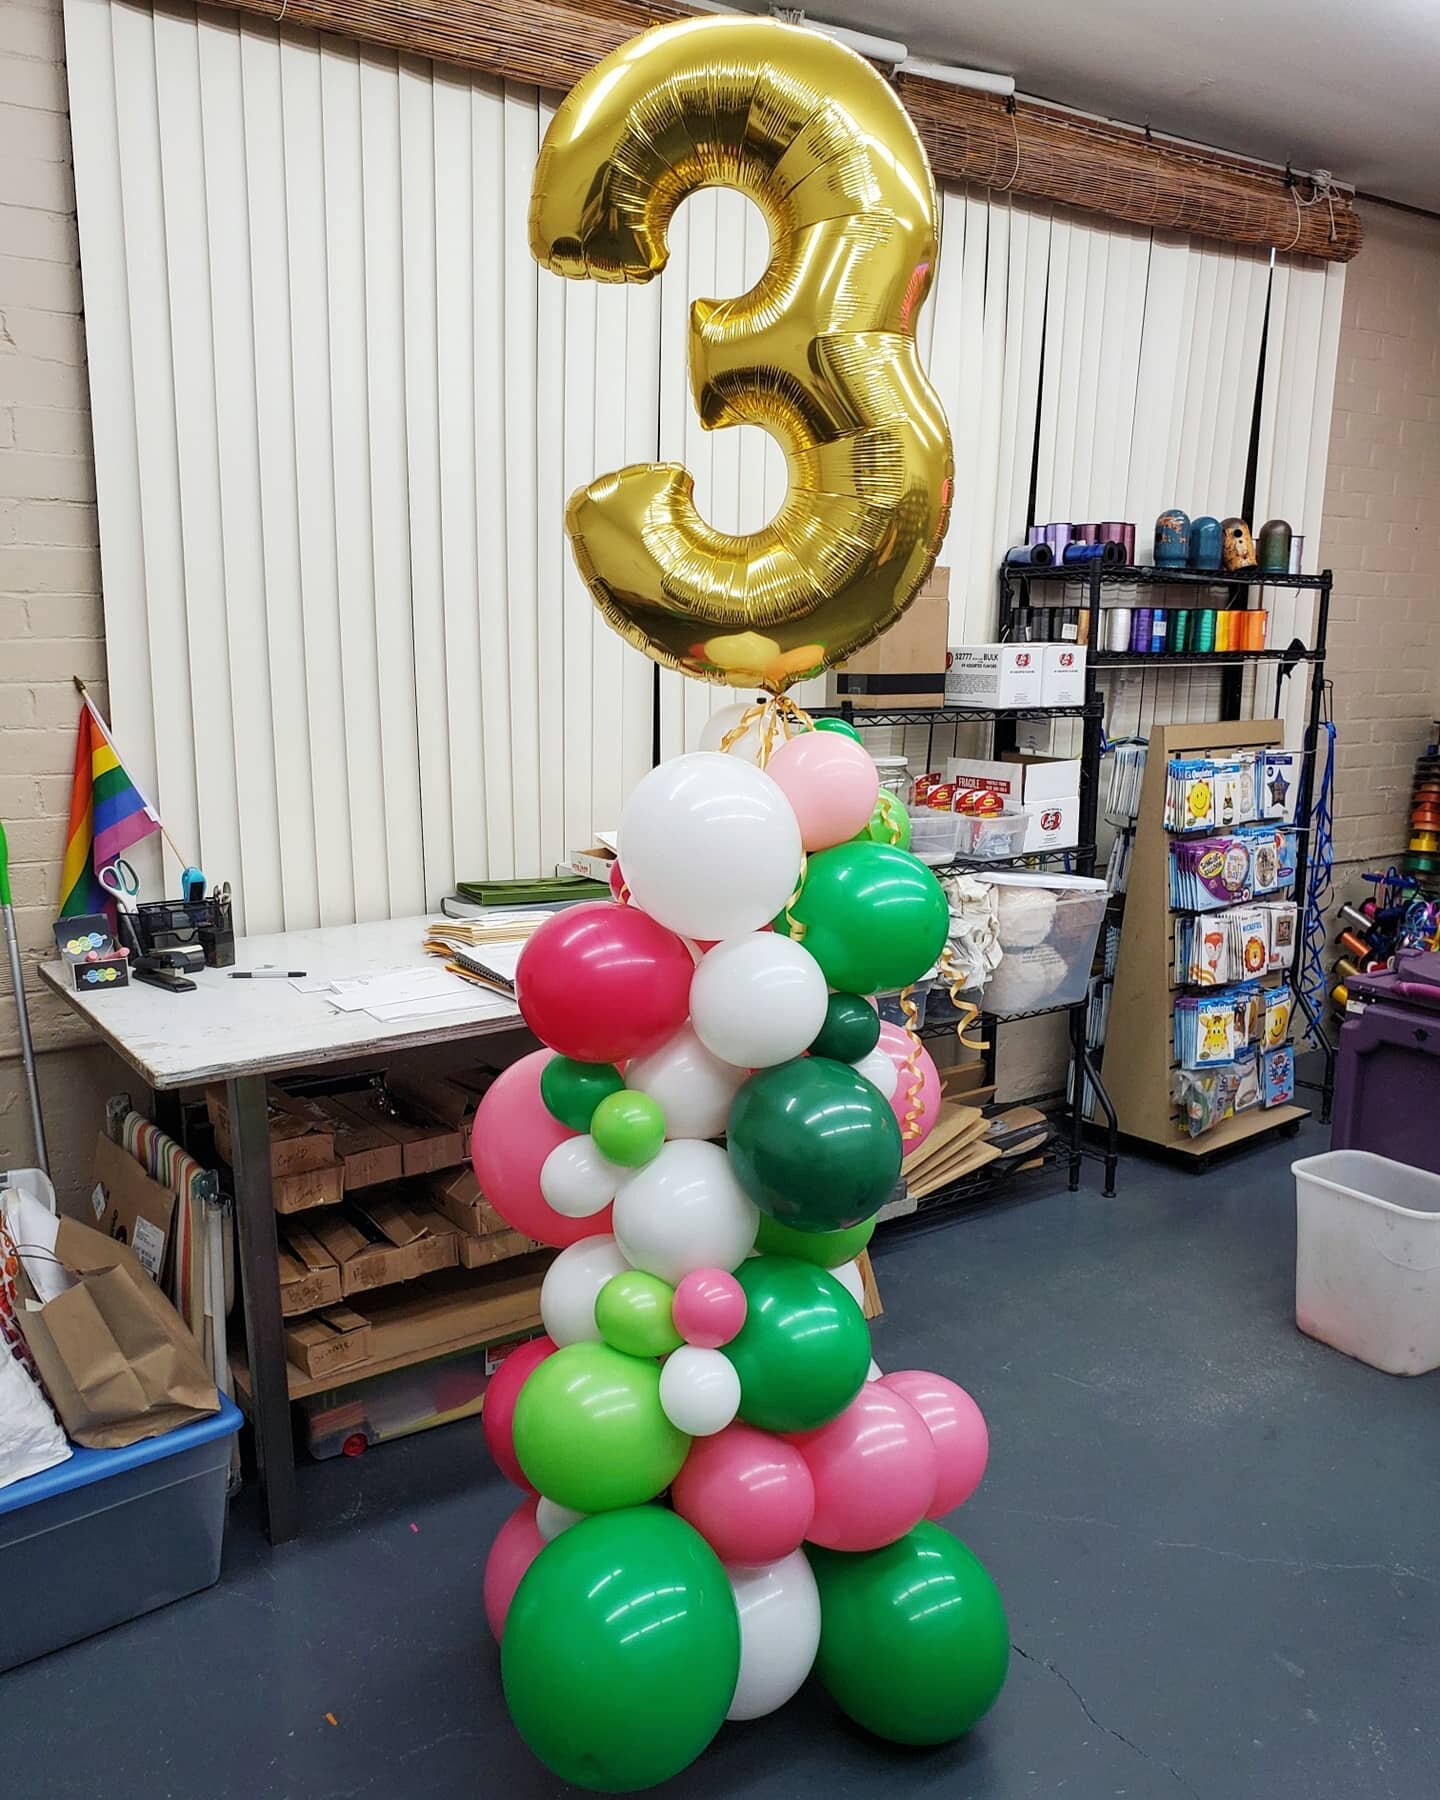 Having so much fun with these self-standing &quot;froth arrangements,&quot; so versatile and easy to customize for any occasion! 

You like?

#balloons #balloonsonbroadway #balloonsportland #balloonspdx #pdxballoons #portlandballoons #balloondecor #d